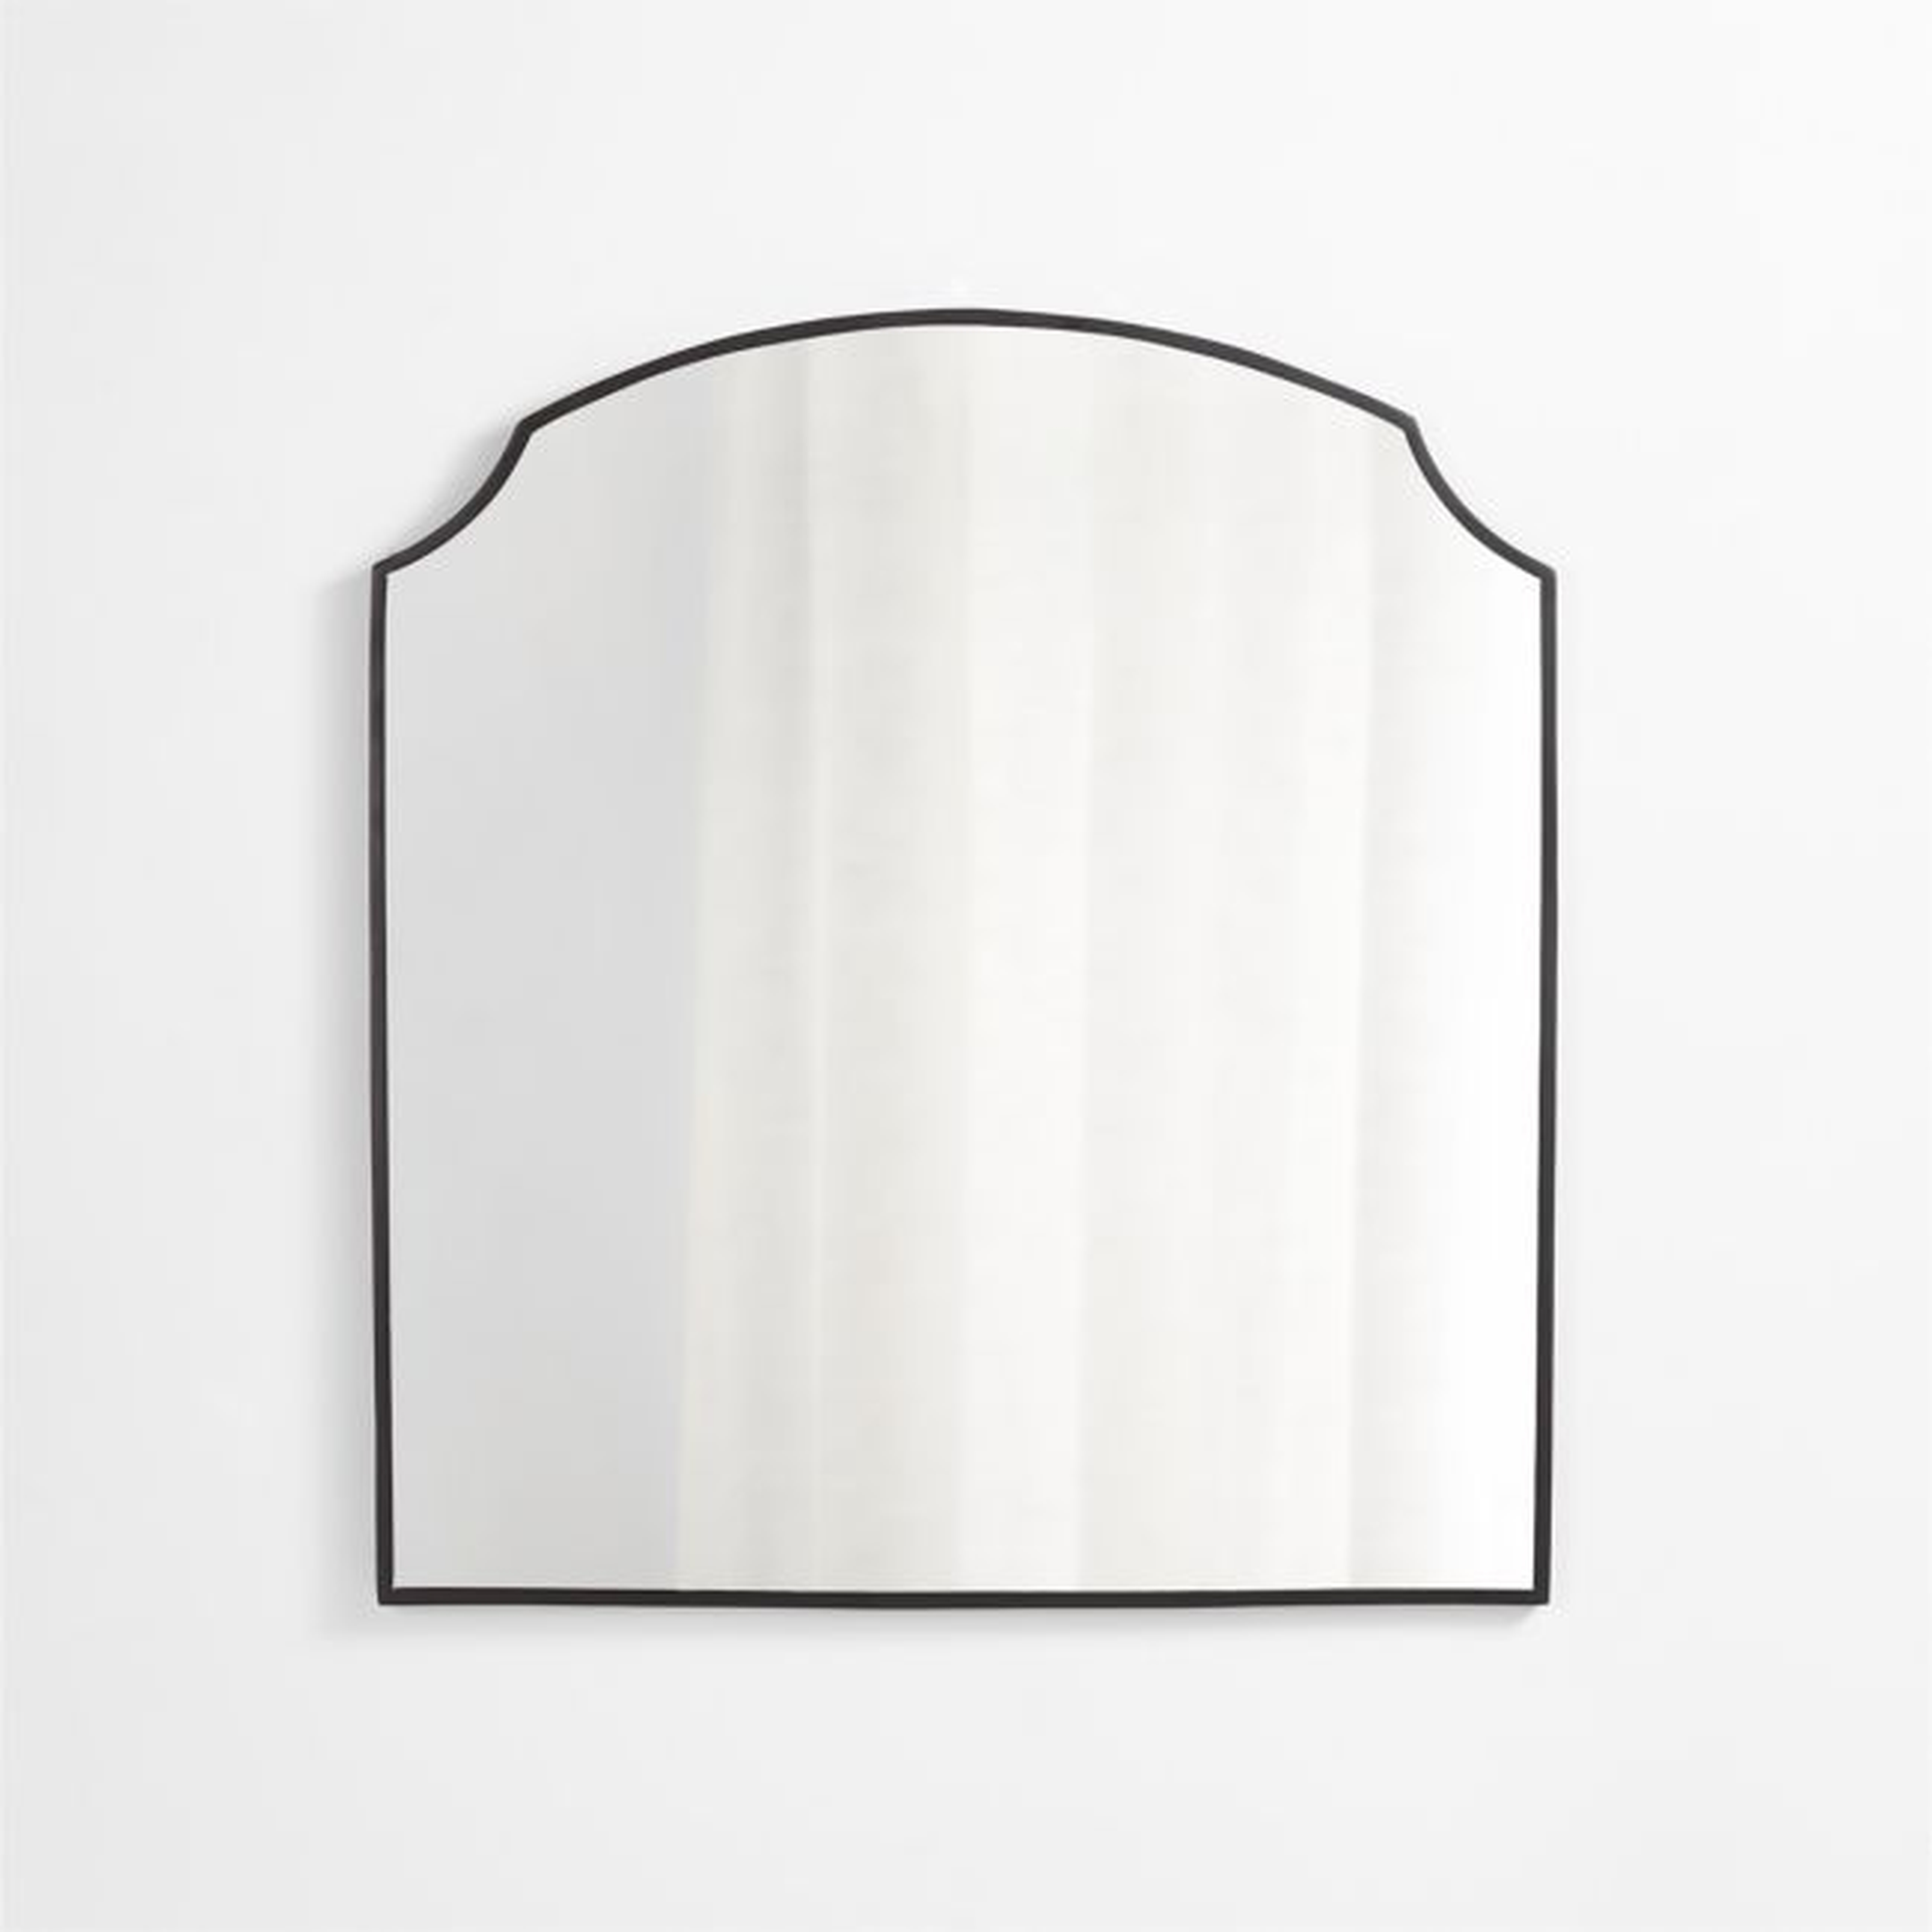 Emmy Black Wall Mirror - Crate and Barrel